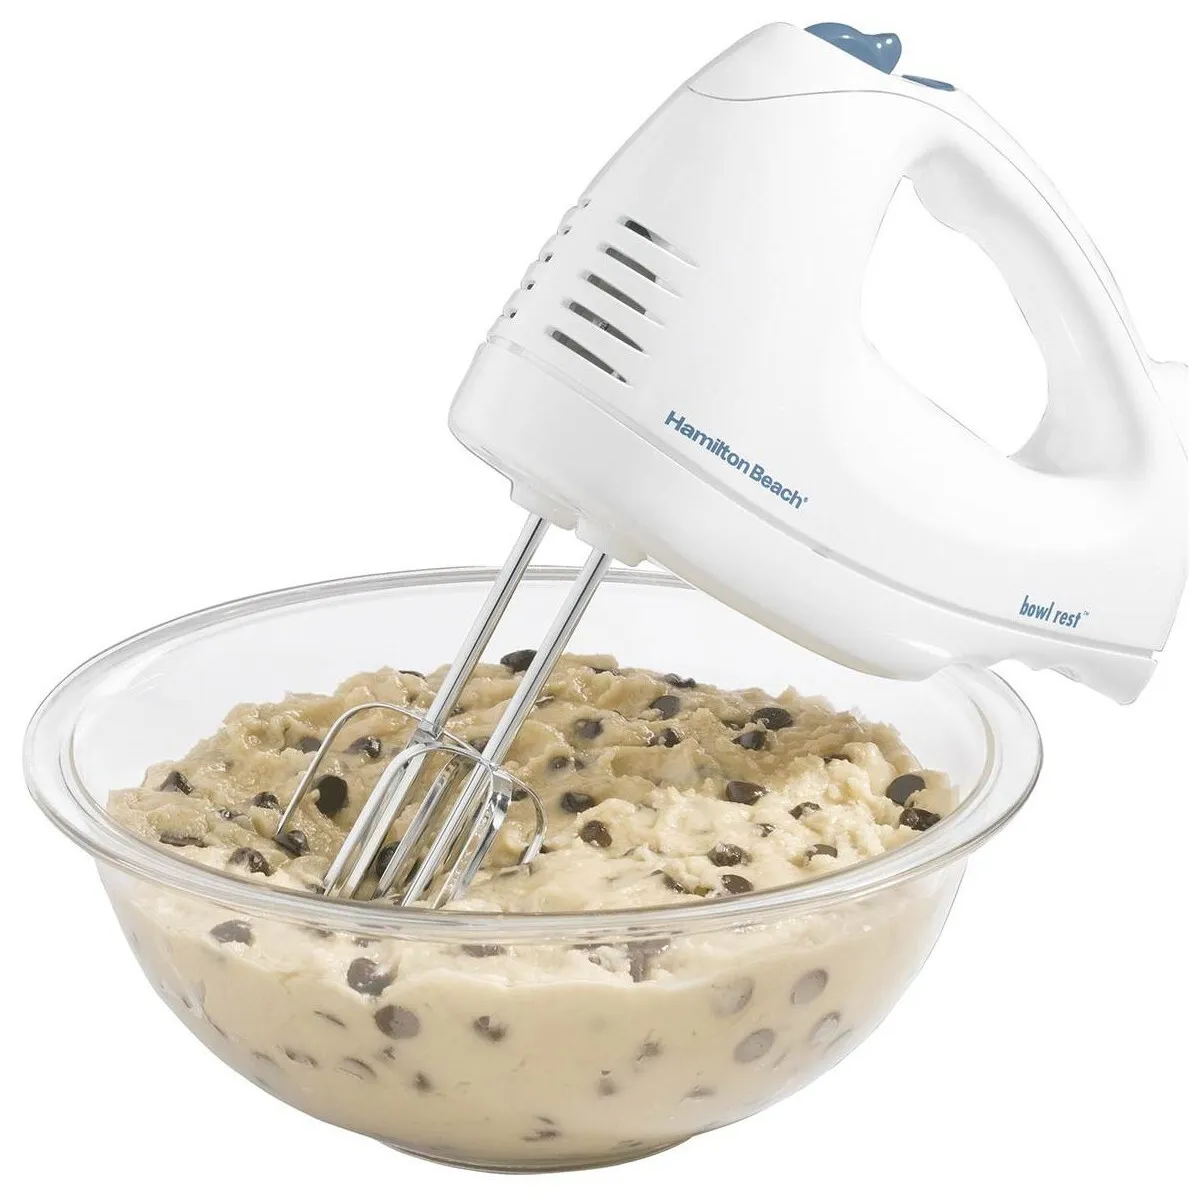 Hamilton Beach 6-Speed Electric Handheld Mixer With Whisk